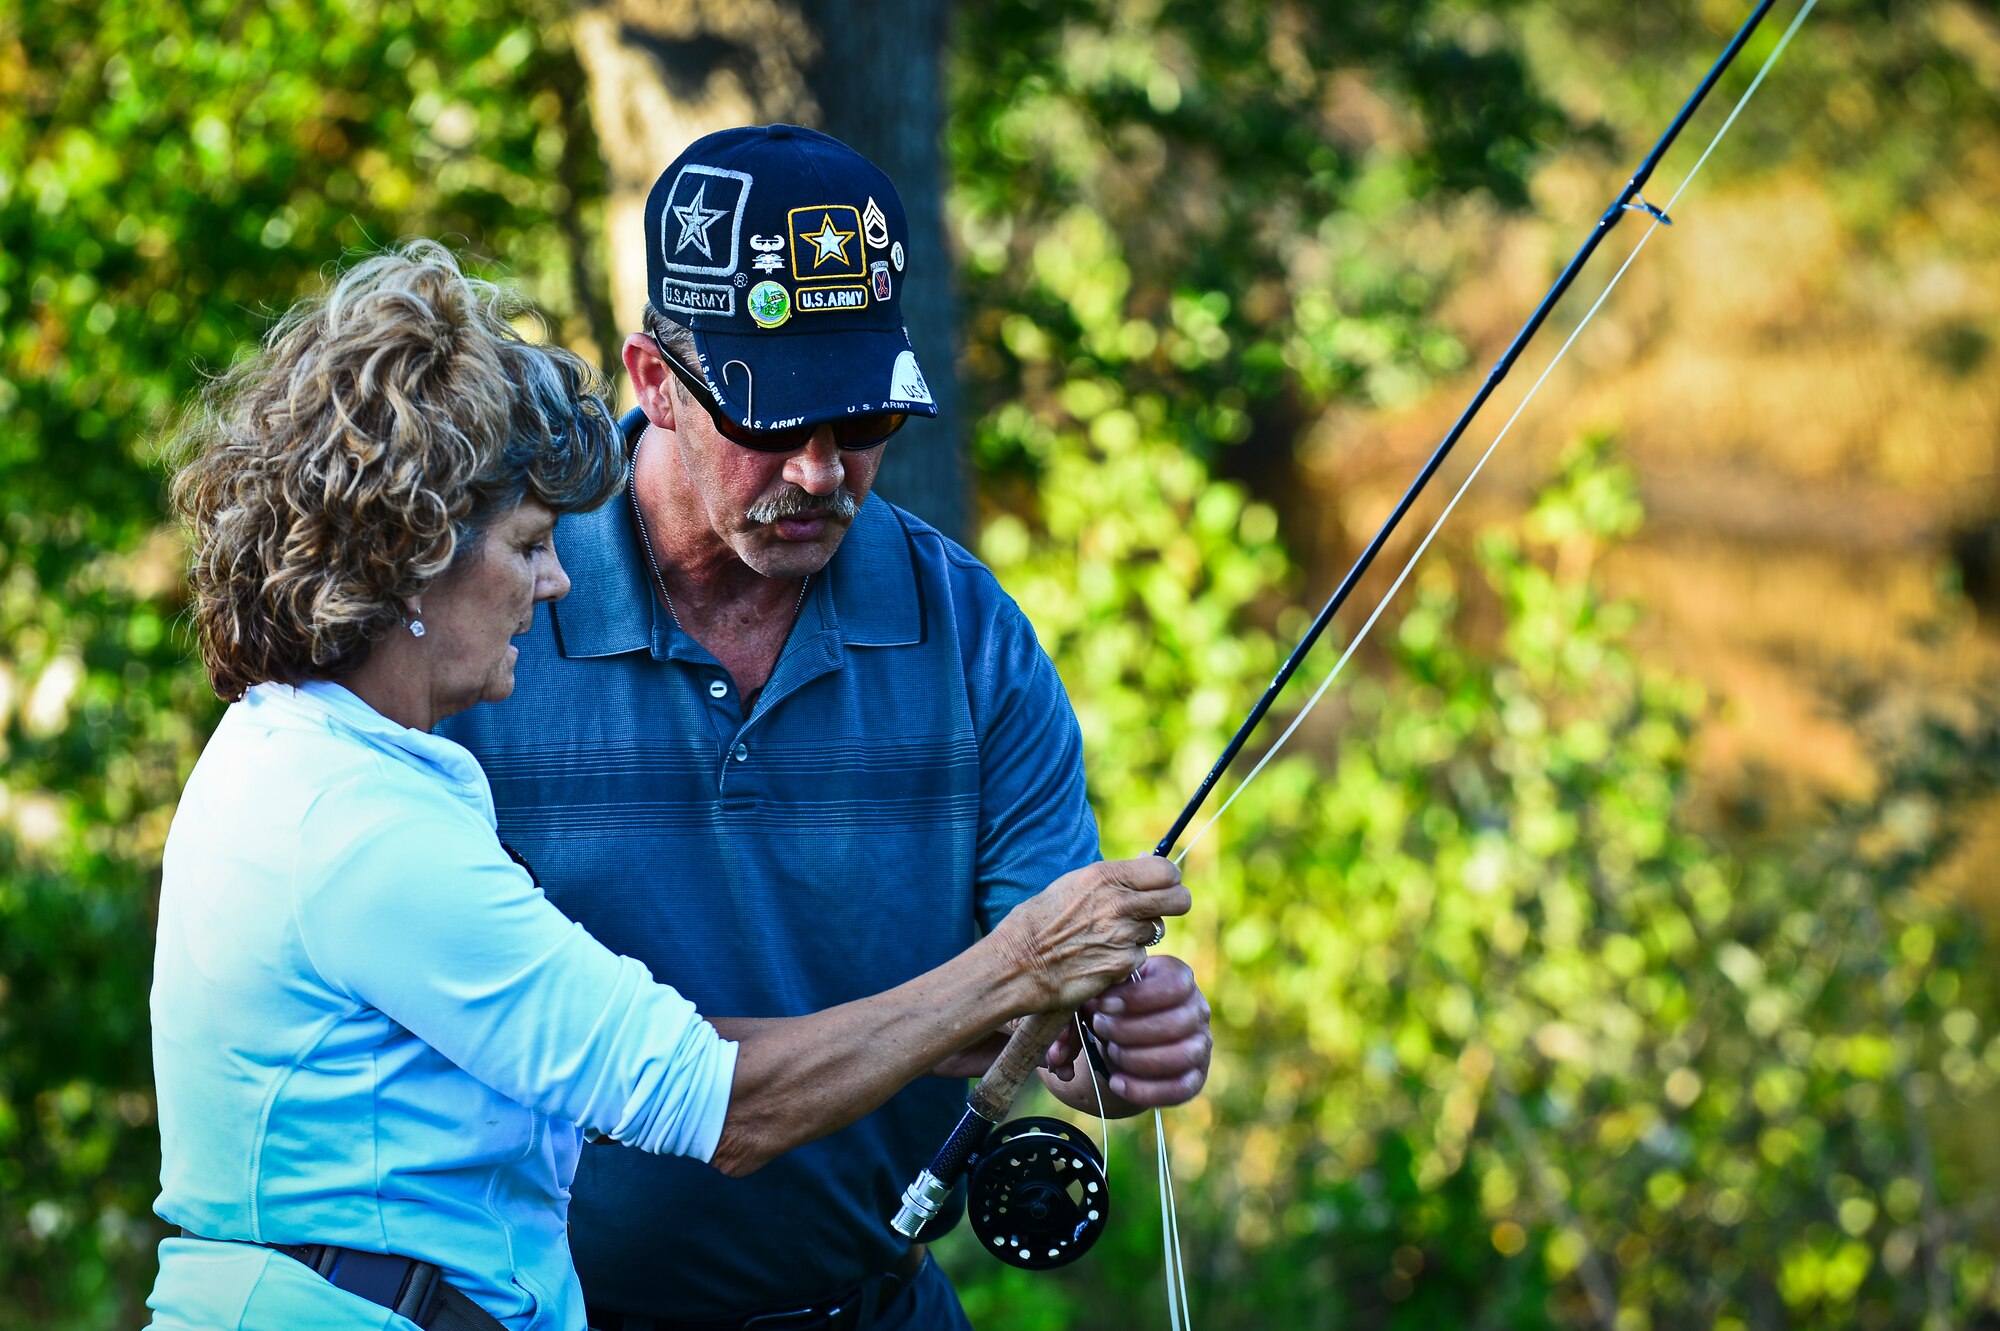 Deb and Harold Bell, Project Healing Waters Fly Fishing participants, ready their fly rod during class held at MacDill Air Force Base, April 17, 2014. PHWFF is dedicated to the physical and emotional rehabilitation of veterans through fly fishing and associated activities, including education and outings. (U.S. Air Force photo by Staff Sgt. Brandon Shapiro/Released)